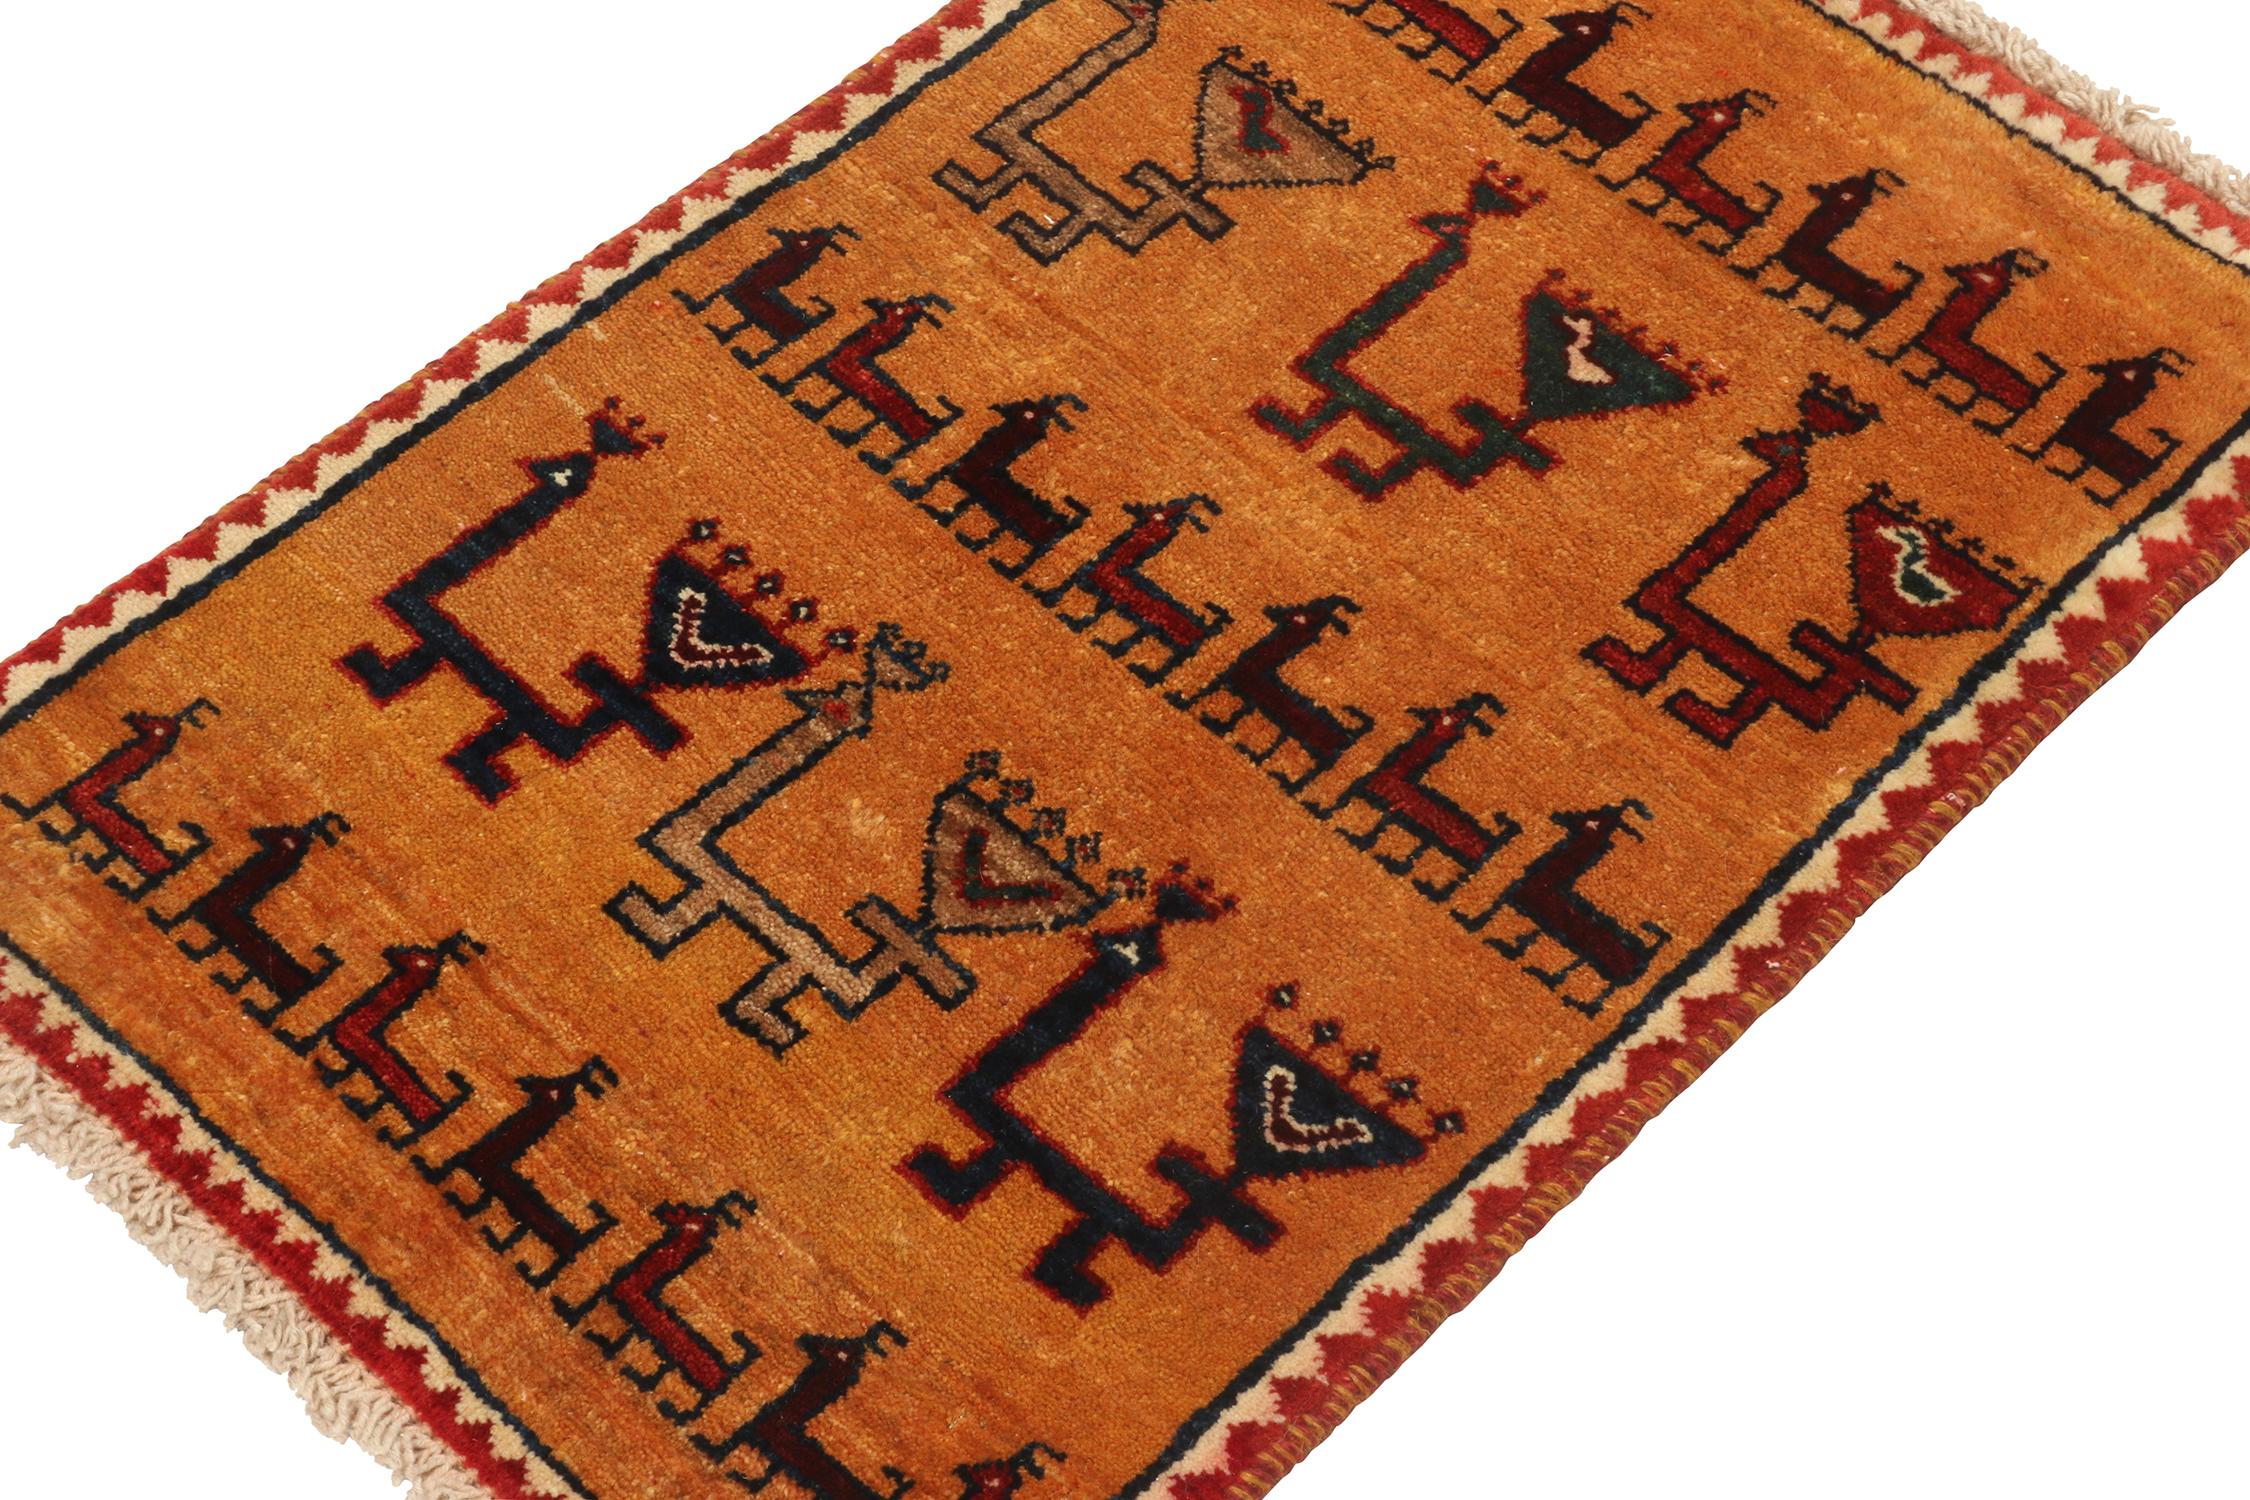 A vintage 2x3 Persian Gabbeh rug in the latest additions to Rug & Kilim’s curation of rare tribal pieces. Hand-knotted in wool circa 1950-1960.

On the Design:

This mid-century piece features animal pictorials in red and beige-brown atop a warm